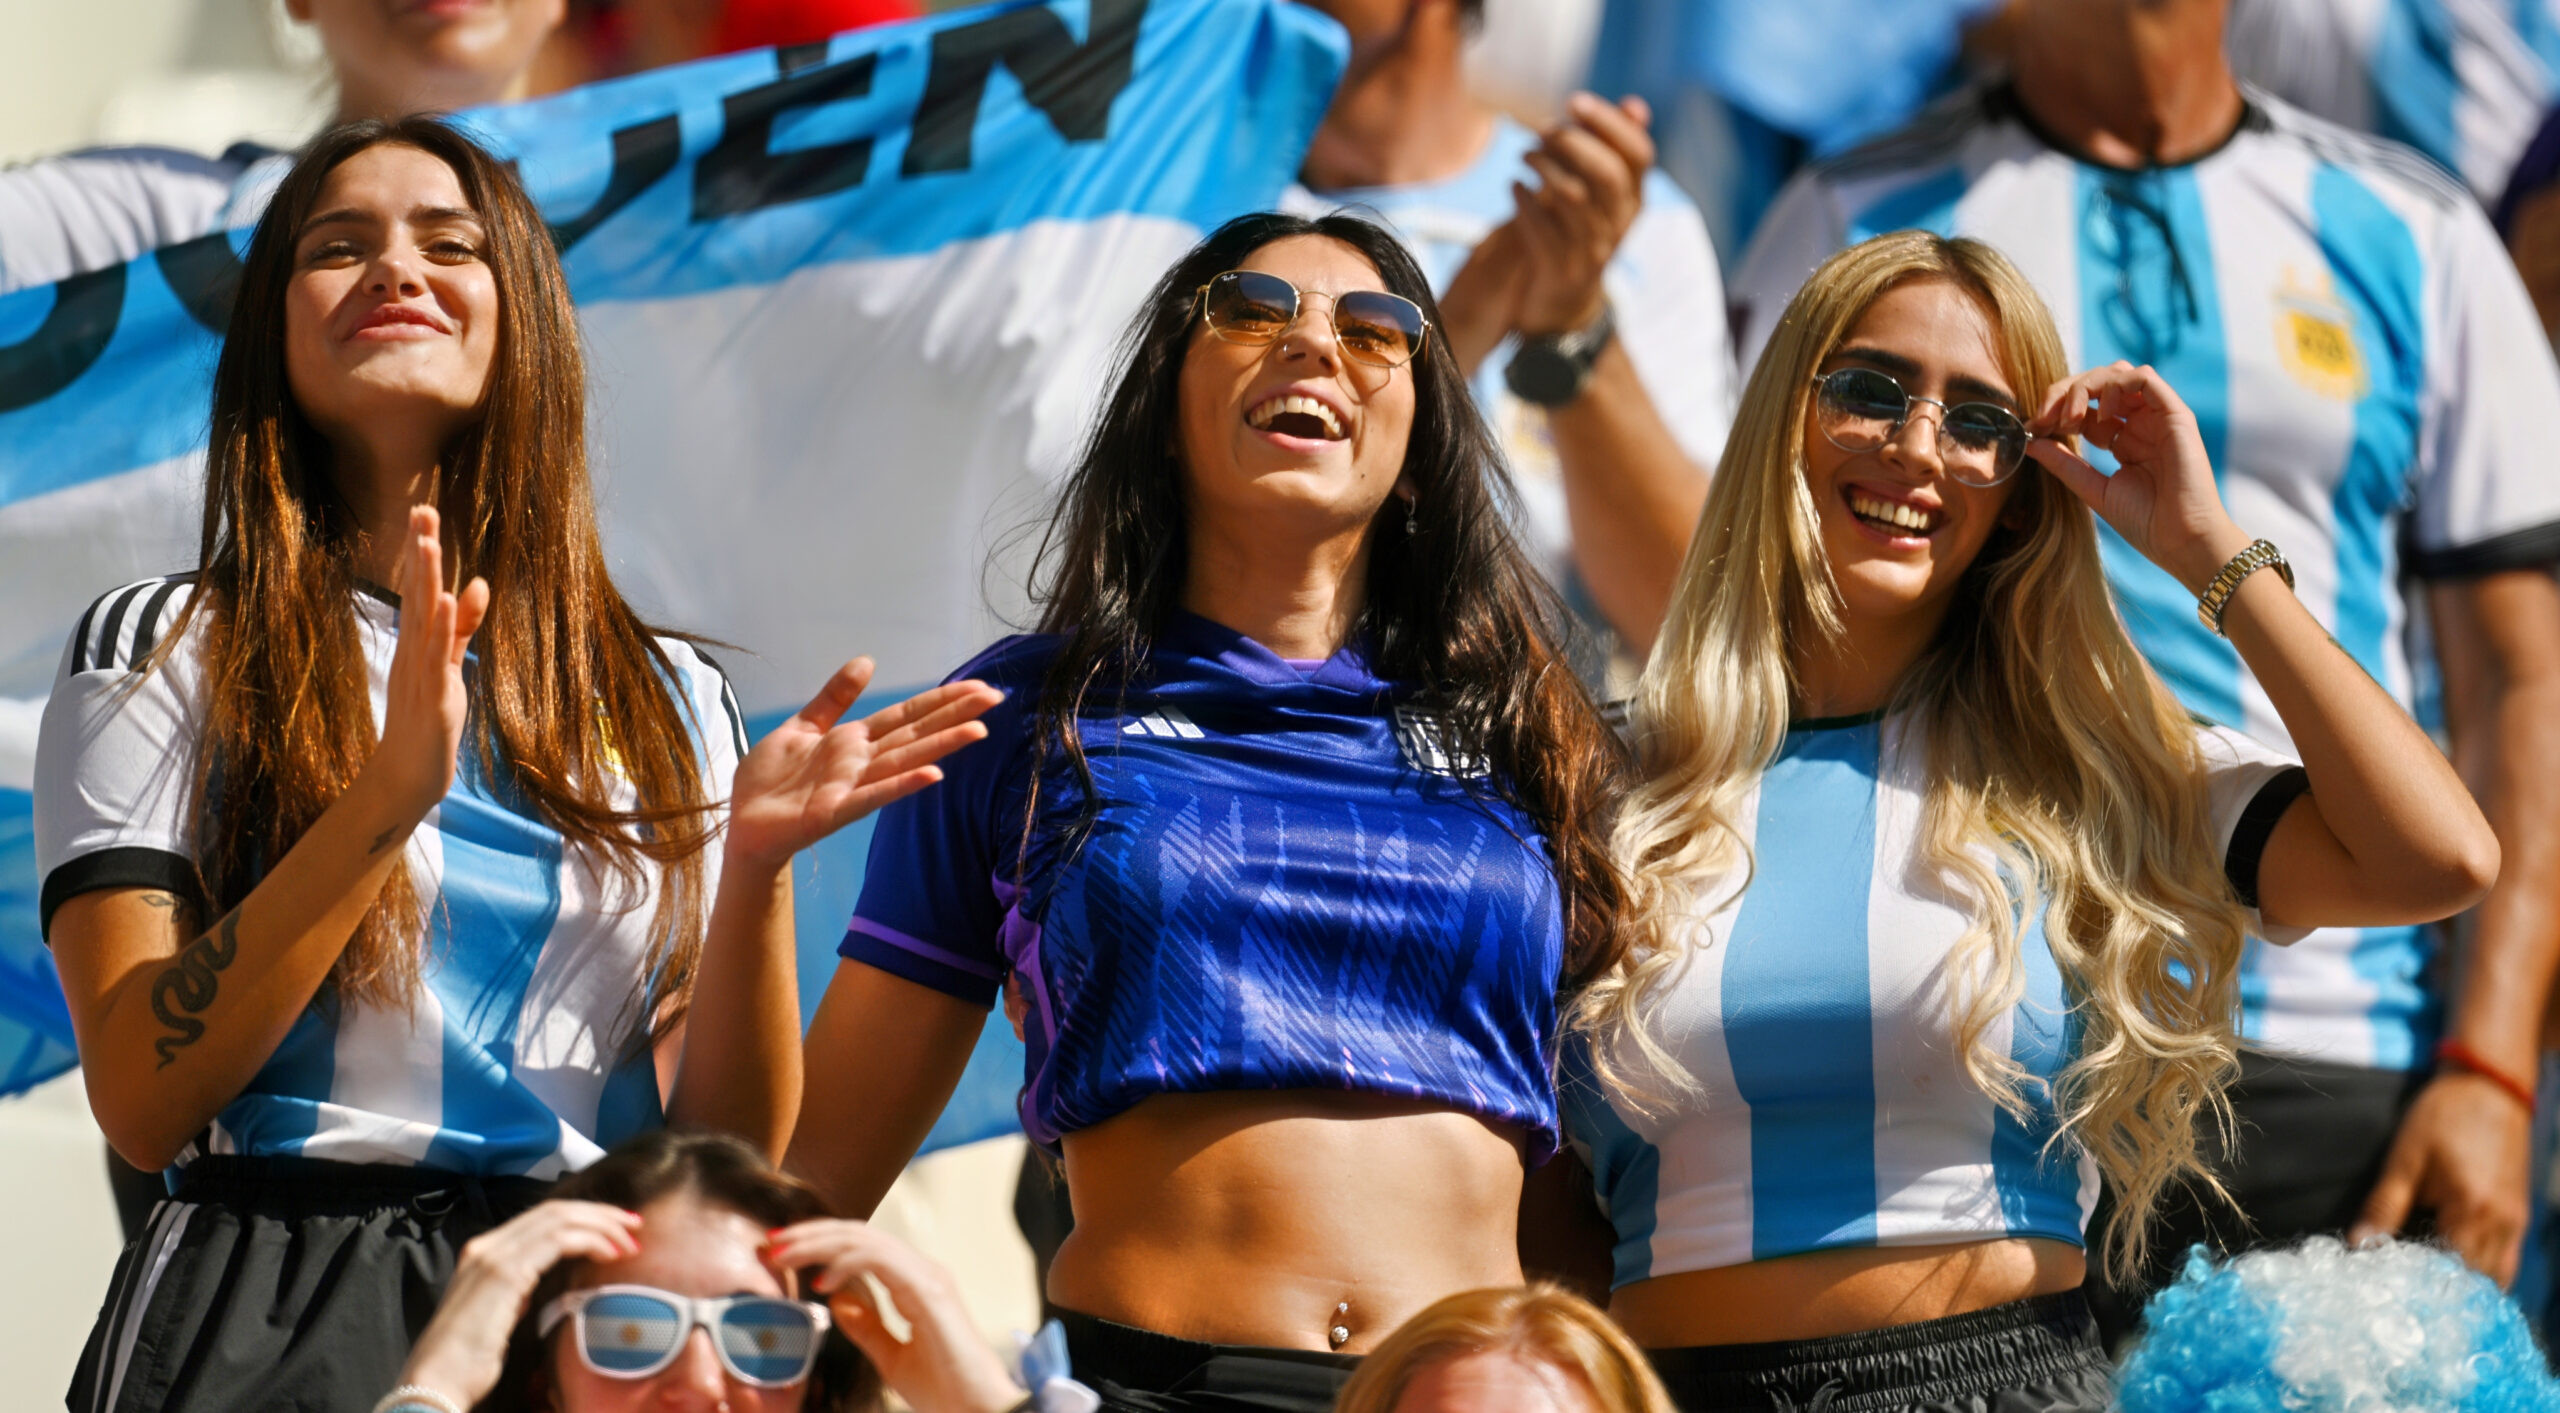 Female Argentina Fan Celebrating Topless In The Stands After World Cup